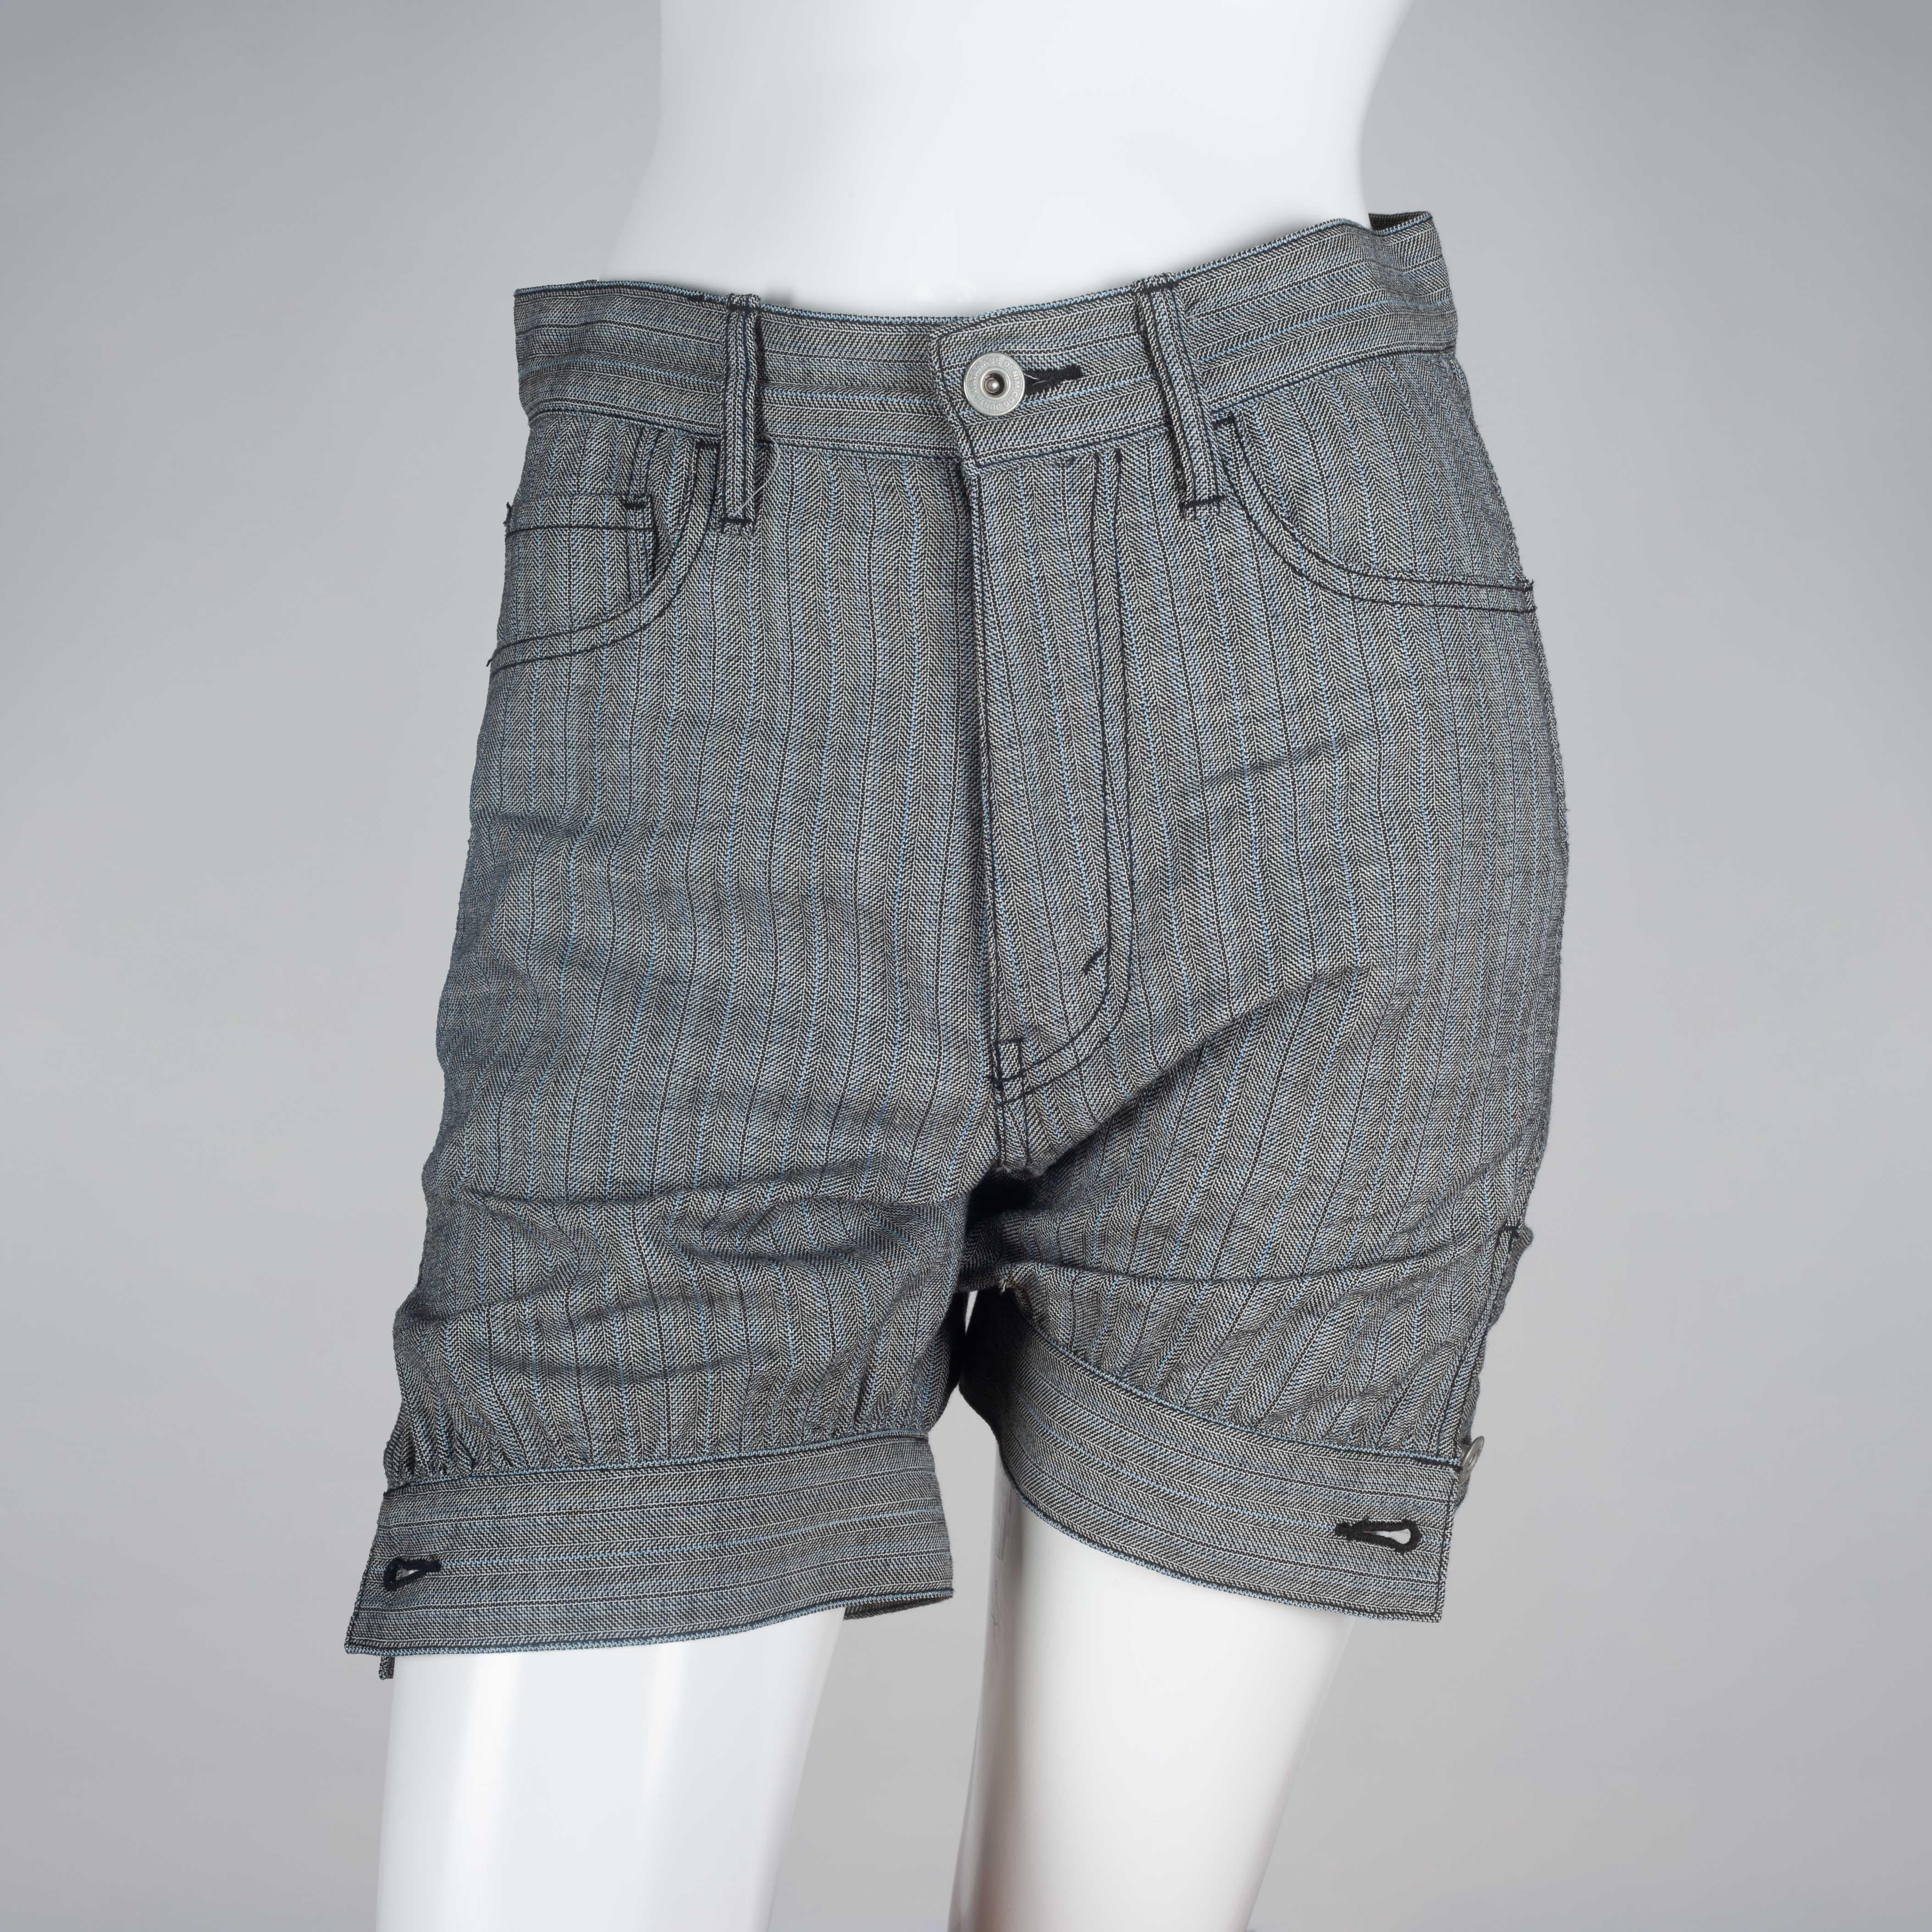 Junya Watanabe Comme des Garçons 2007, gray wool shorts from Japan with pin stripe pattern, dark stitching and tapered, button hem. Super extra small. 

YEAR: 2007
MARKED SIZE: XS
US WOMEN'S: XS
US MEN'S: XXS
FIT: Regular
WAIST: 14